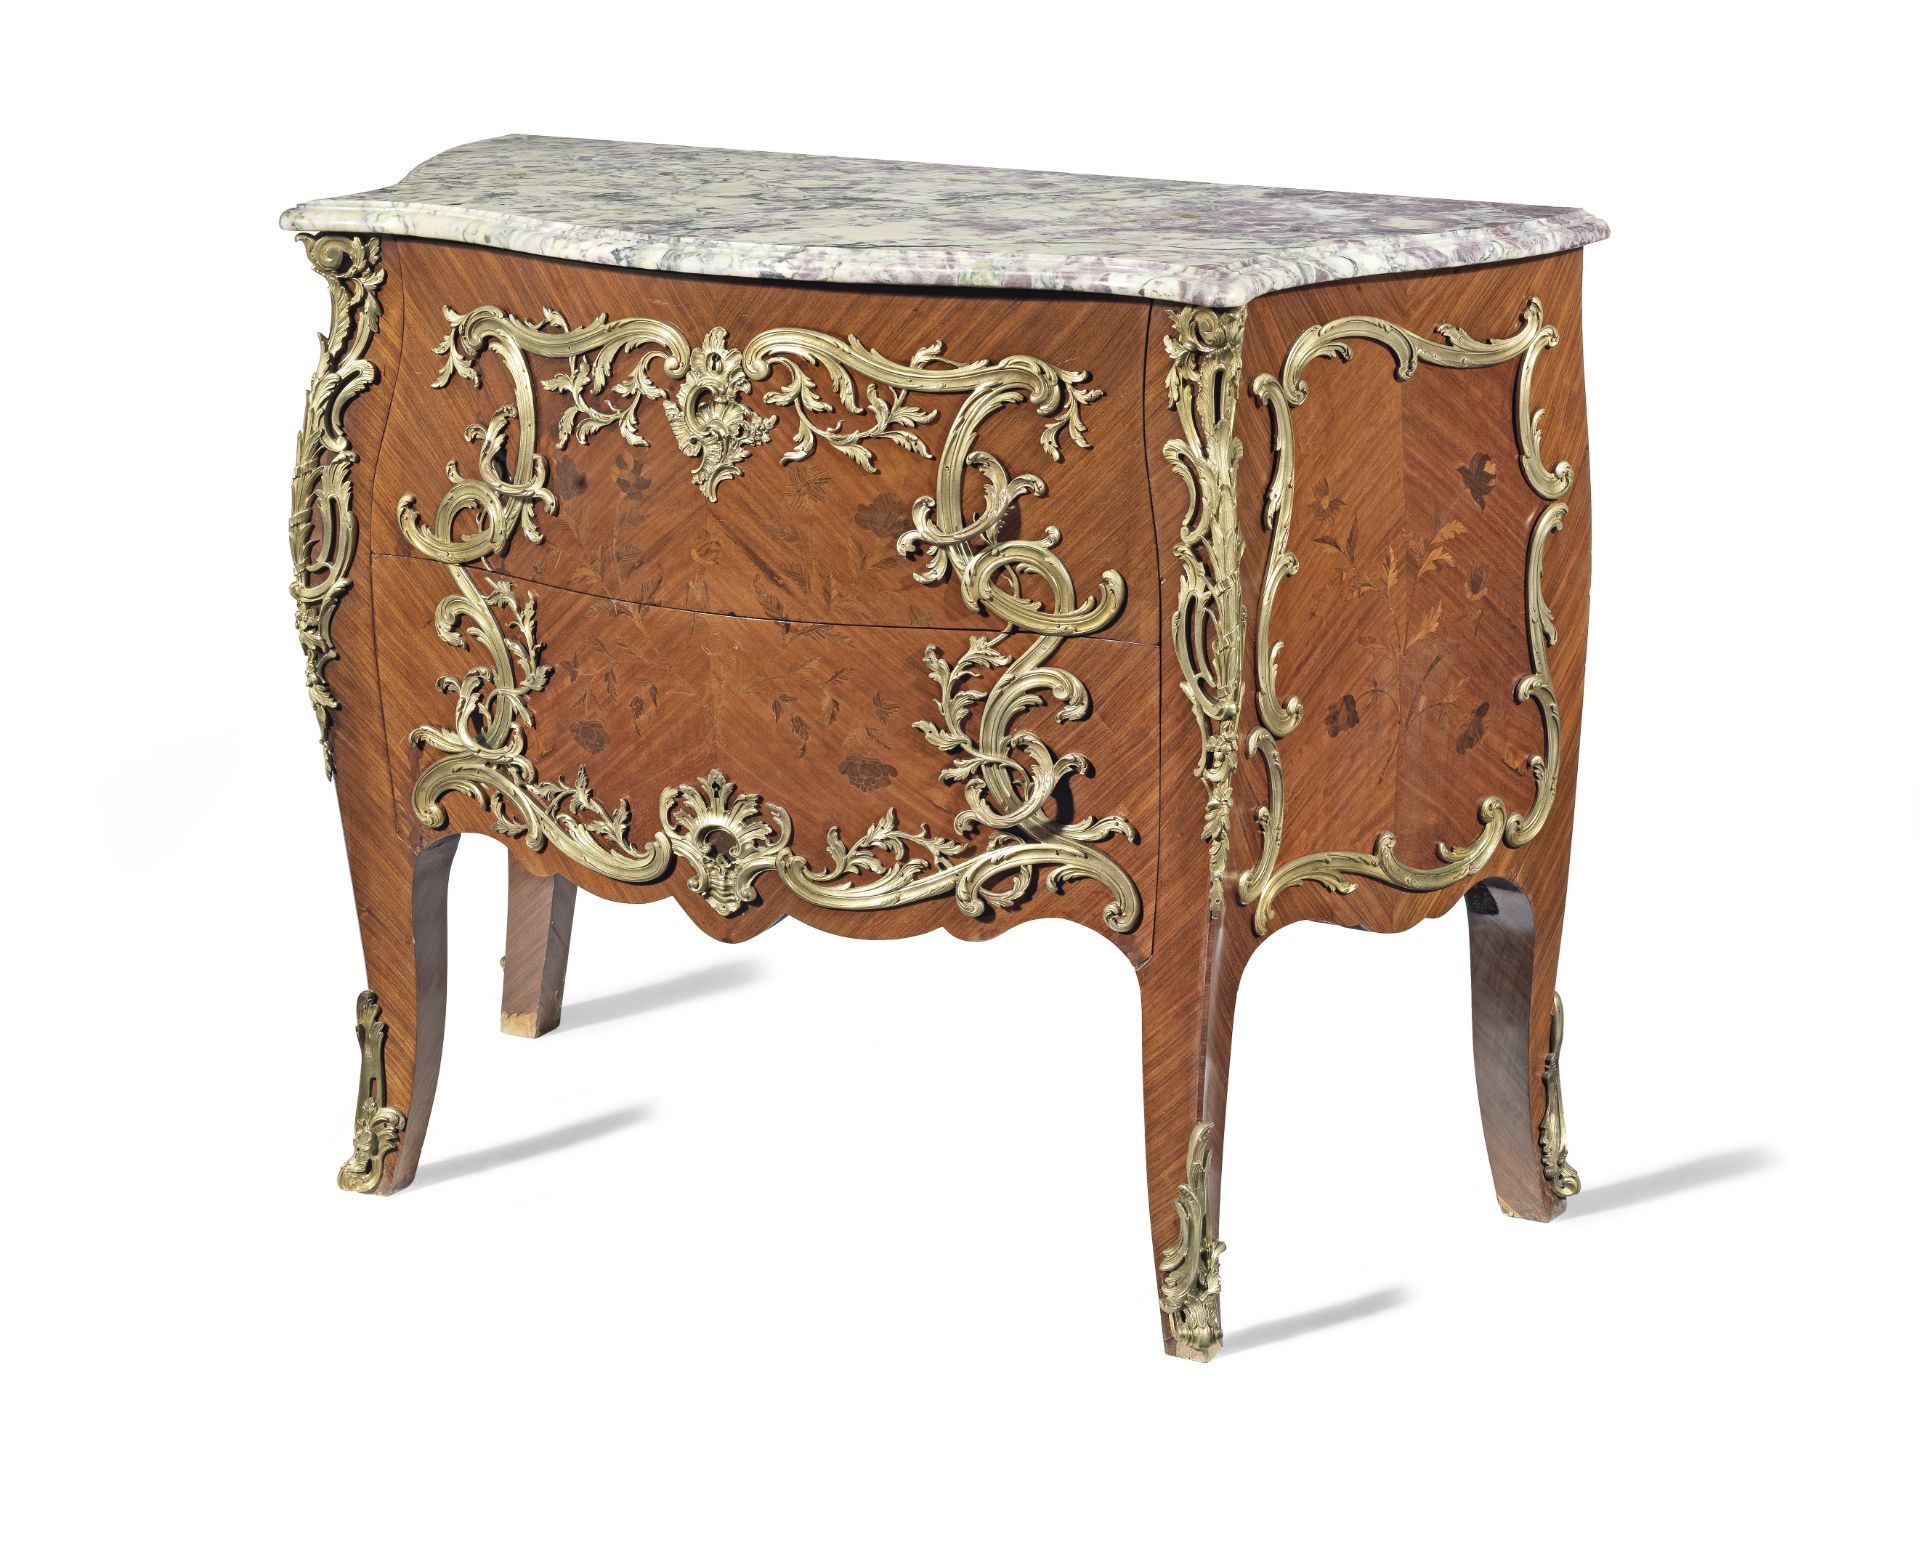 A French late 19th century ormolu mounted kingwood, bois satine and 'bois de bout' (end-cut) marq...